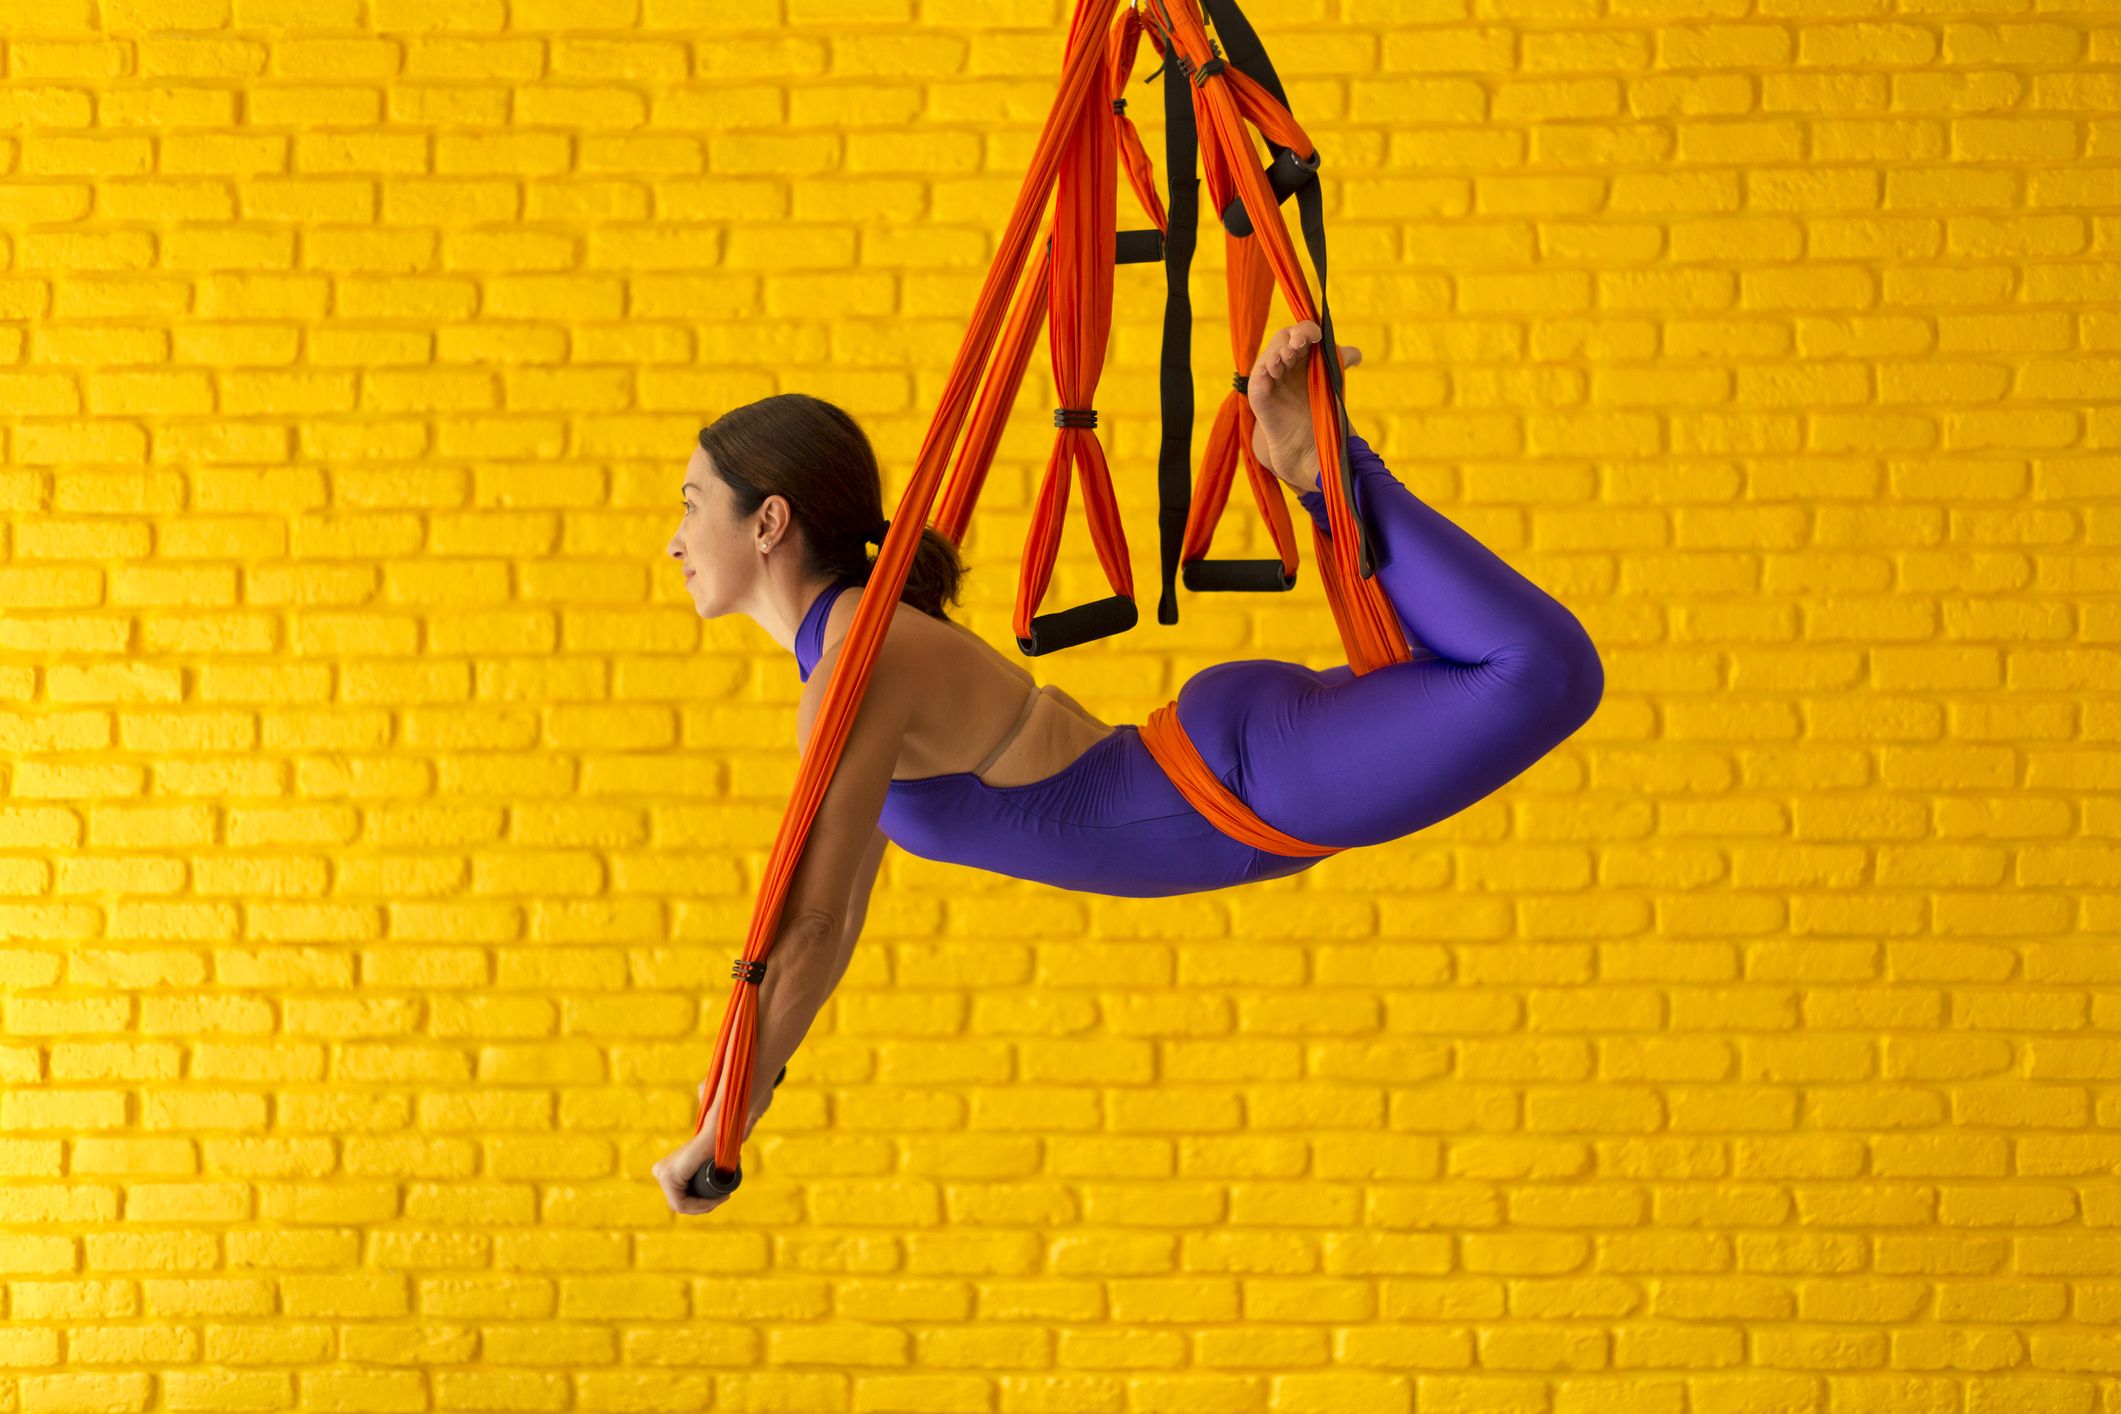 Amazon.com : PRIOR FITNESS Low Stretch Aerial Yoga Hammock Kit 4.4 Yards Aerial  Silk For Professional Yoga Instructors,Yoga Swing Set,Improve your  Flexibility & Core Strength,Yoga Starter Kit : Sports & Outdoors